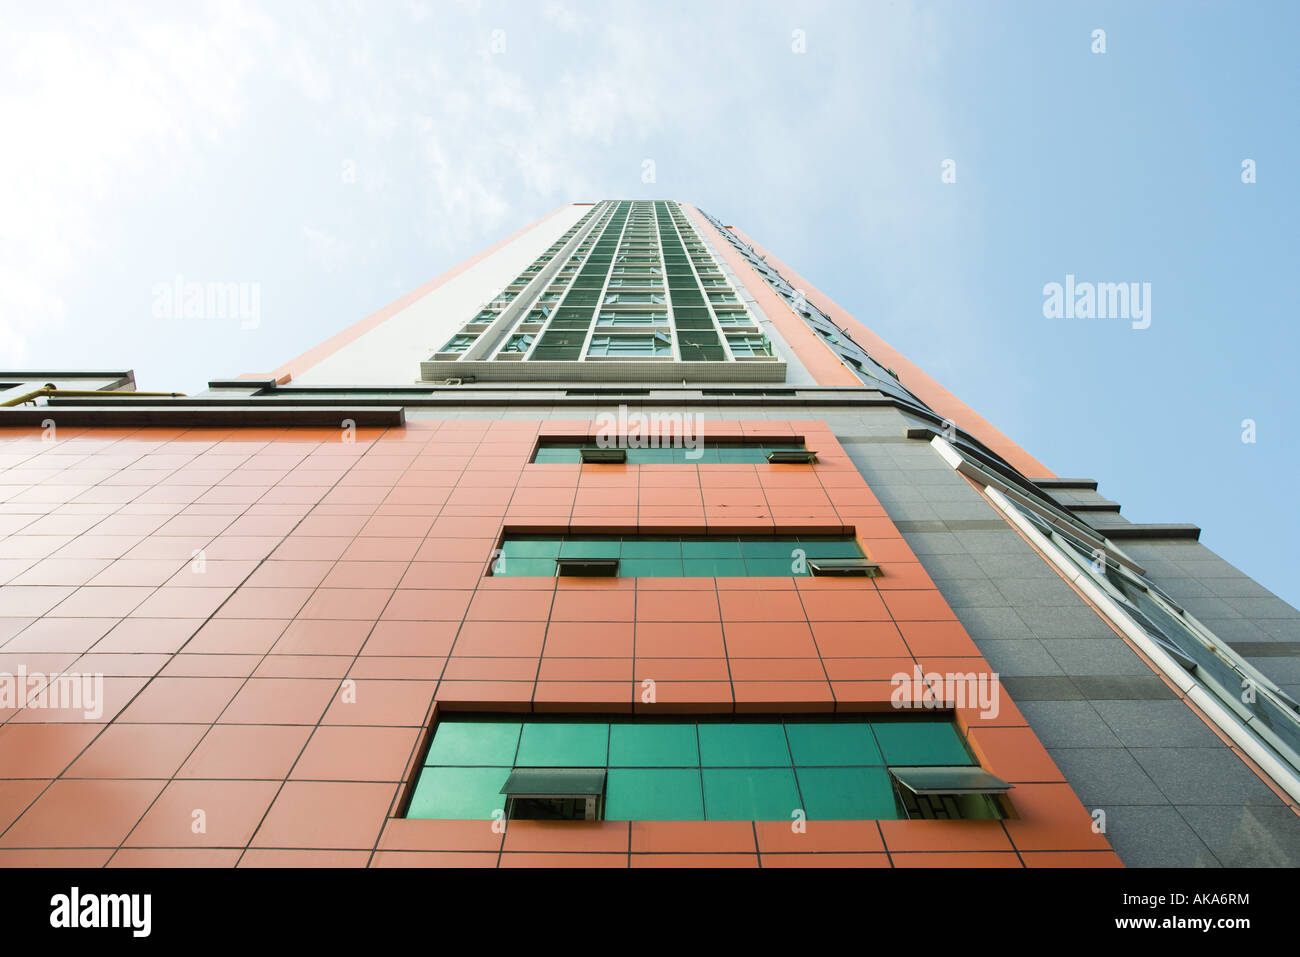 High rise, low angle view Stock Photo